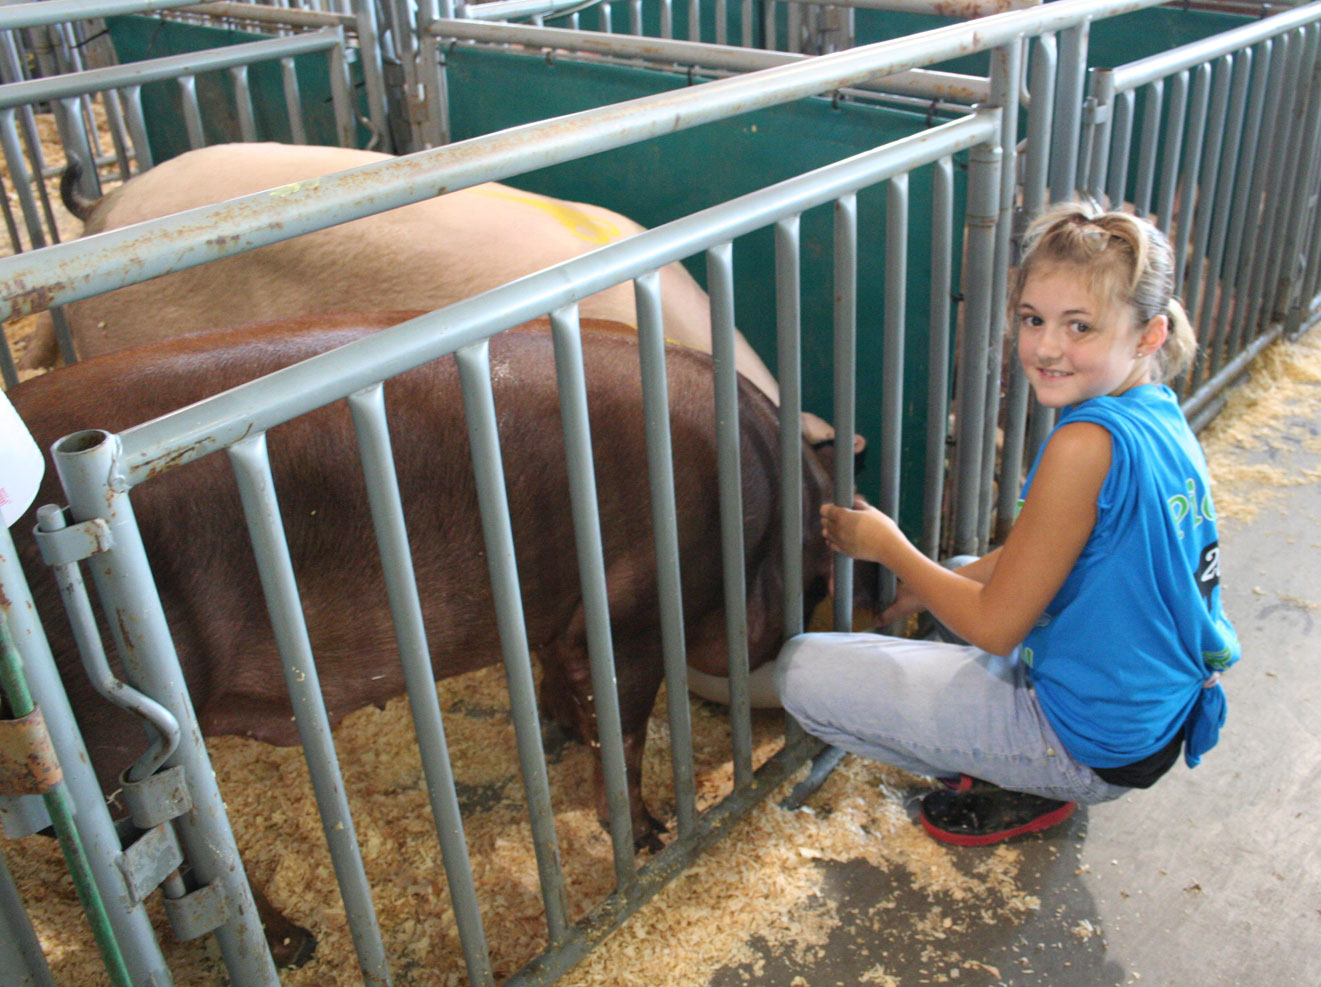 The Pick-A-Pig club gives youth ages 8 and up the opportunity to participate in a livestock project. 